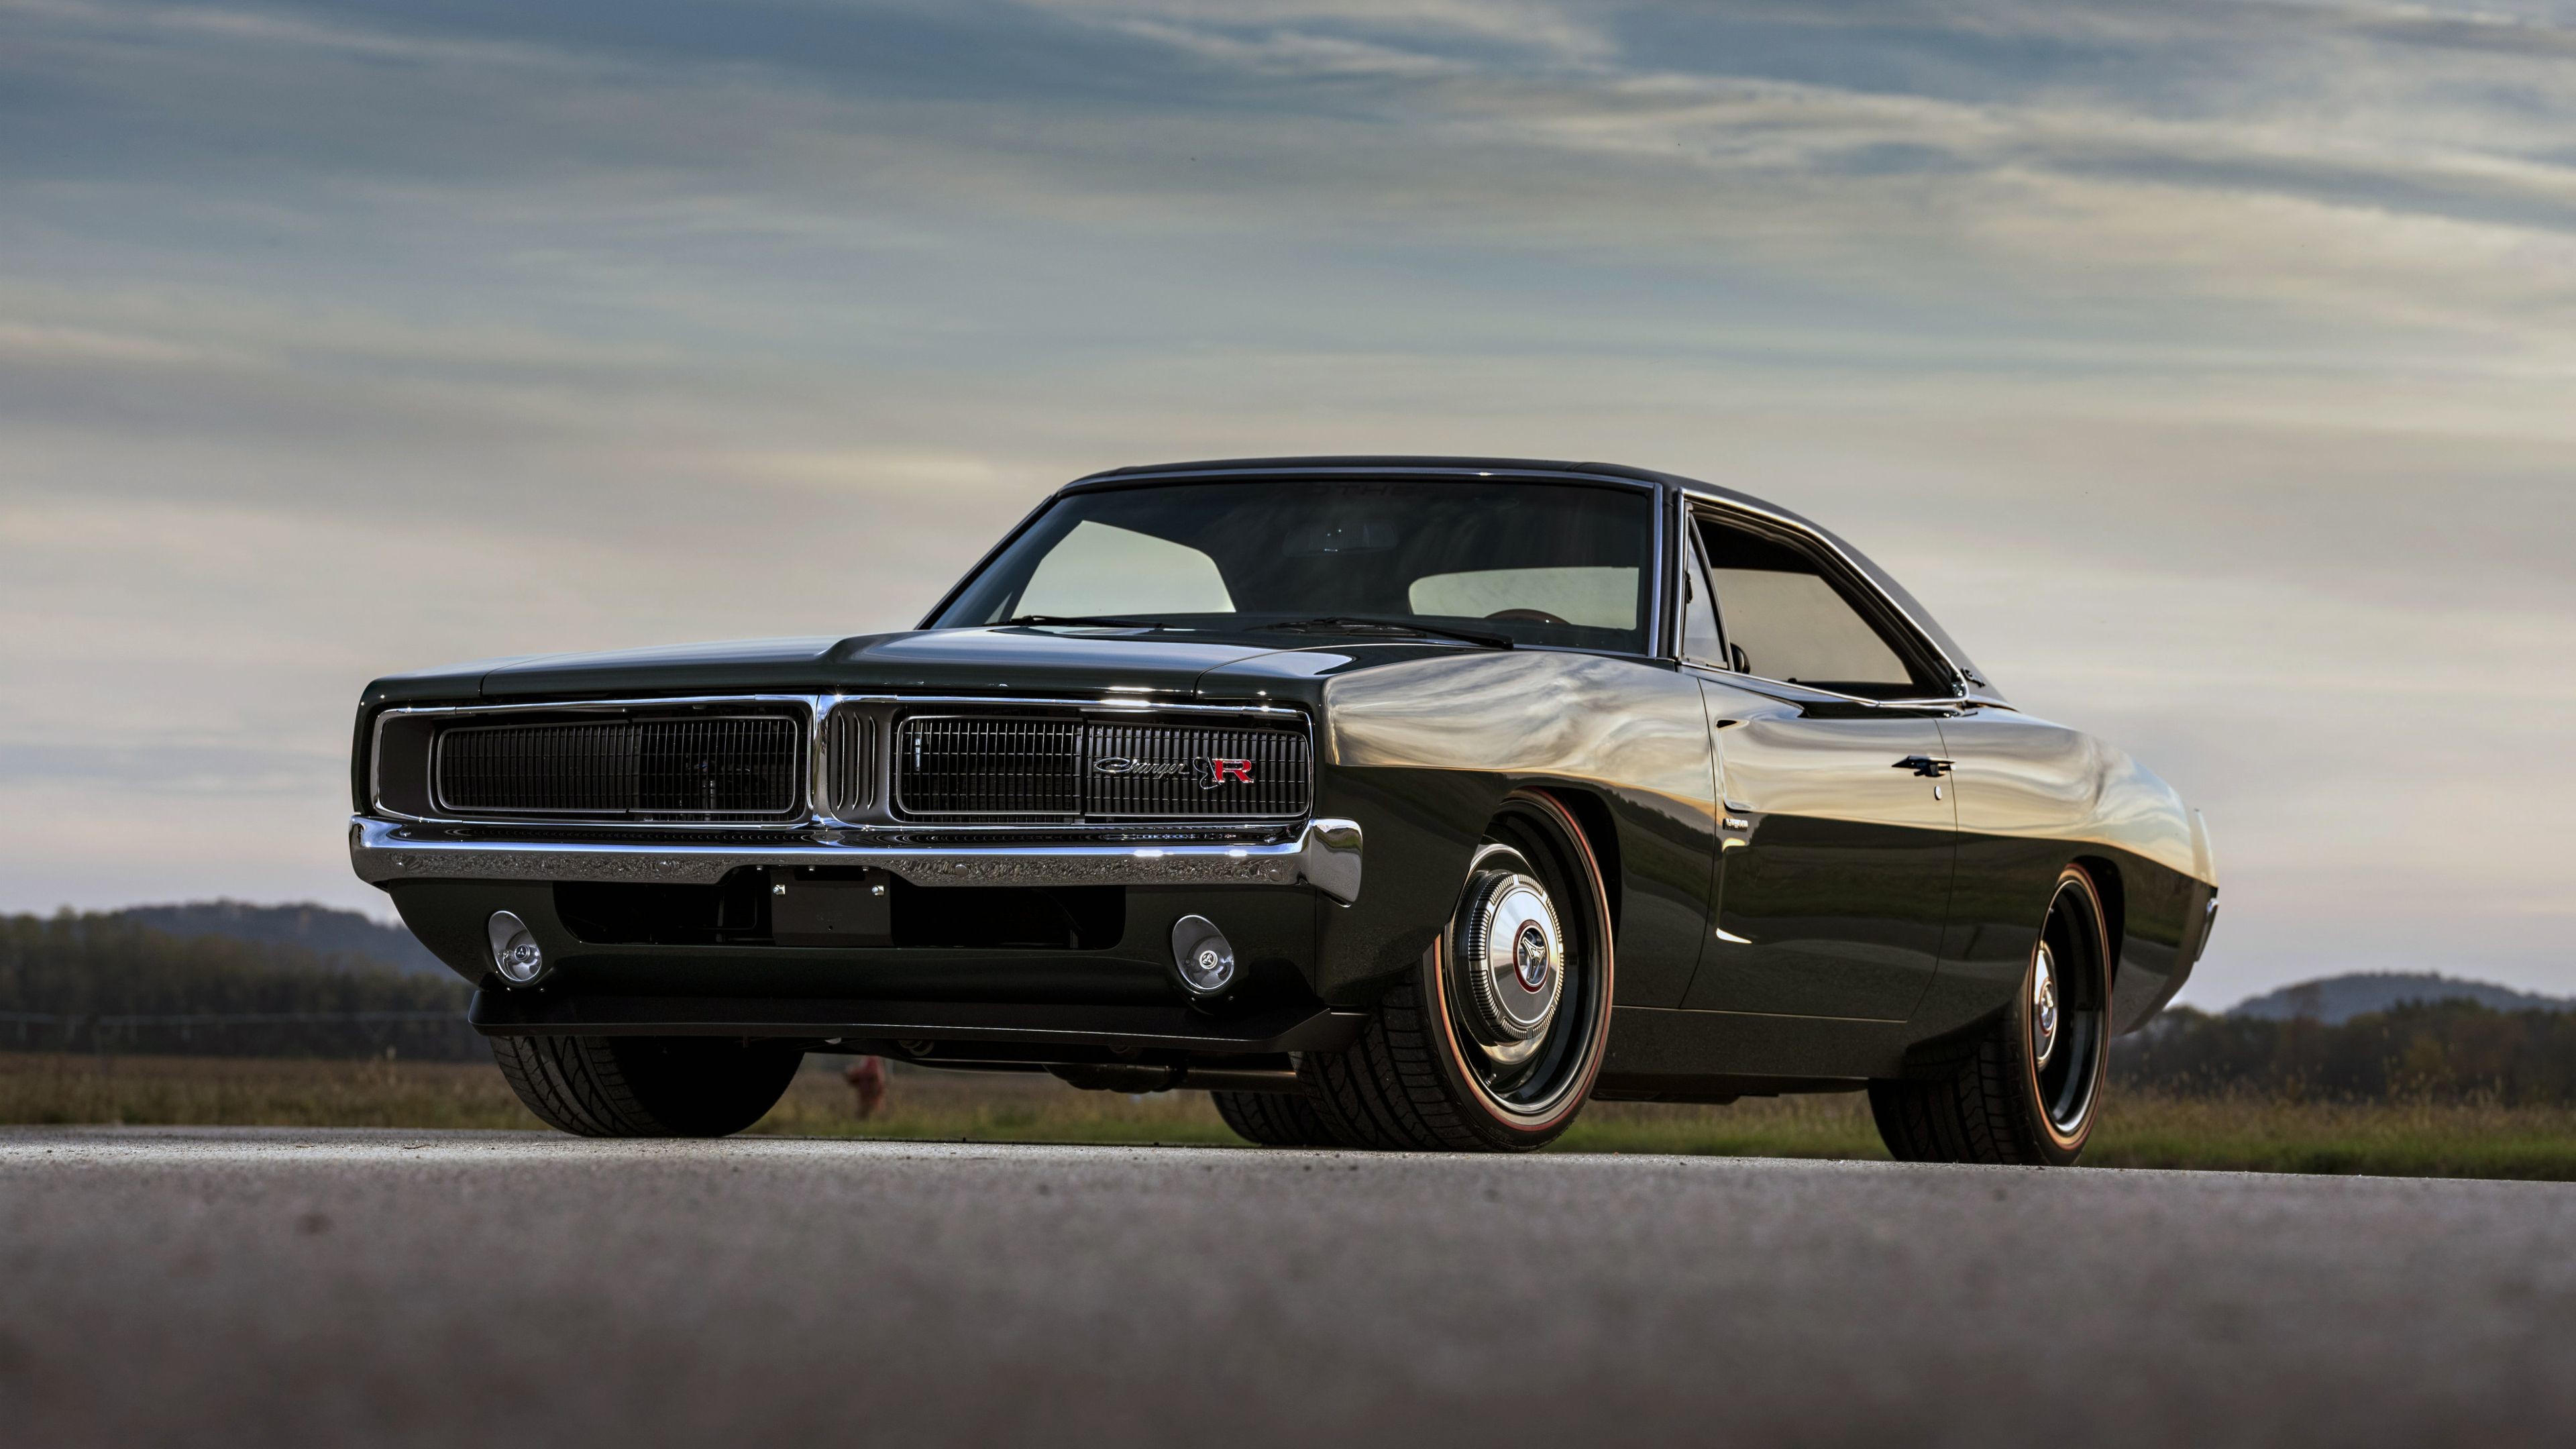 1969 Ringbrothers Dodge Charger Defector Front Hd Wallpapers, - Dodge Charger 1969 Wallpaper Hd - HD Wallpaper 